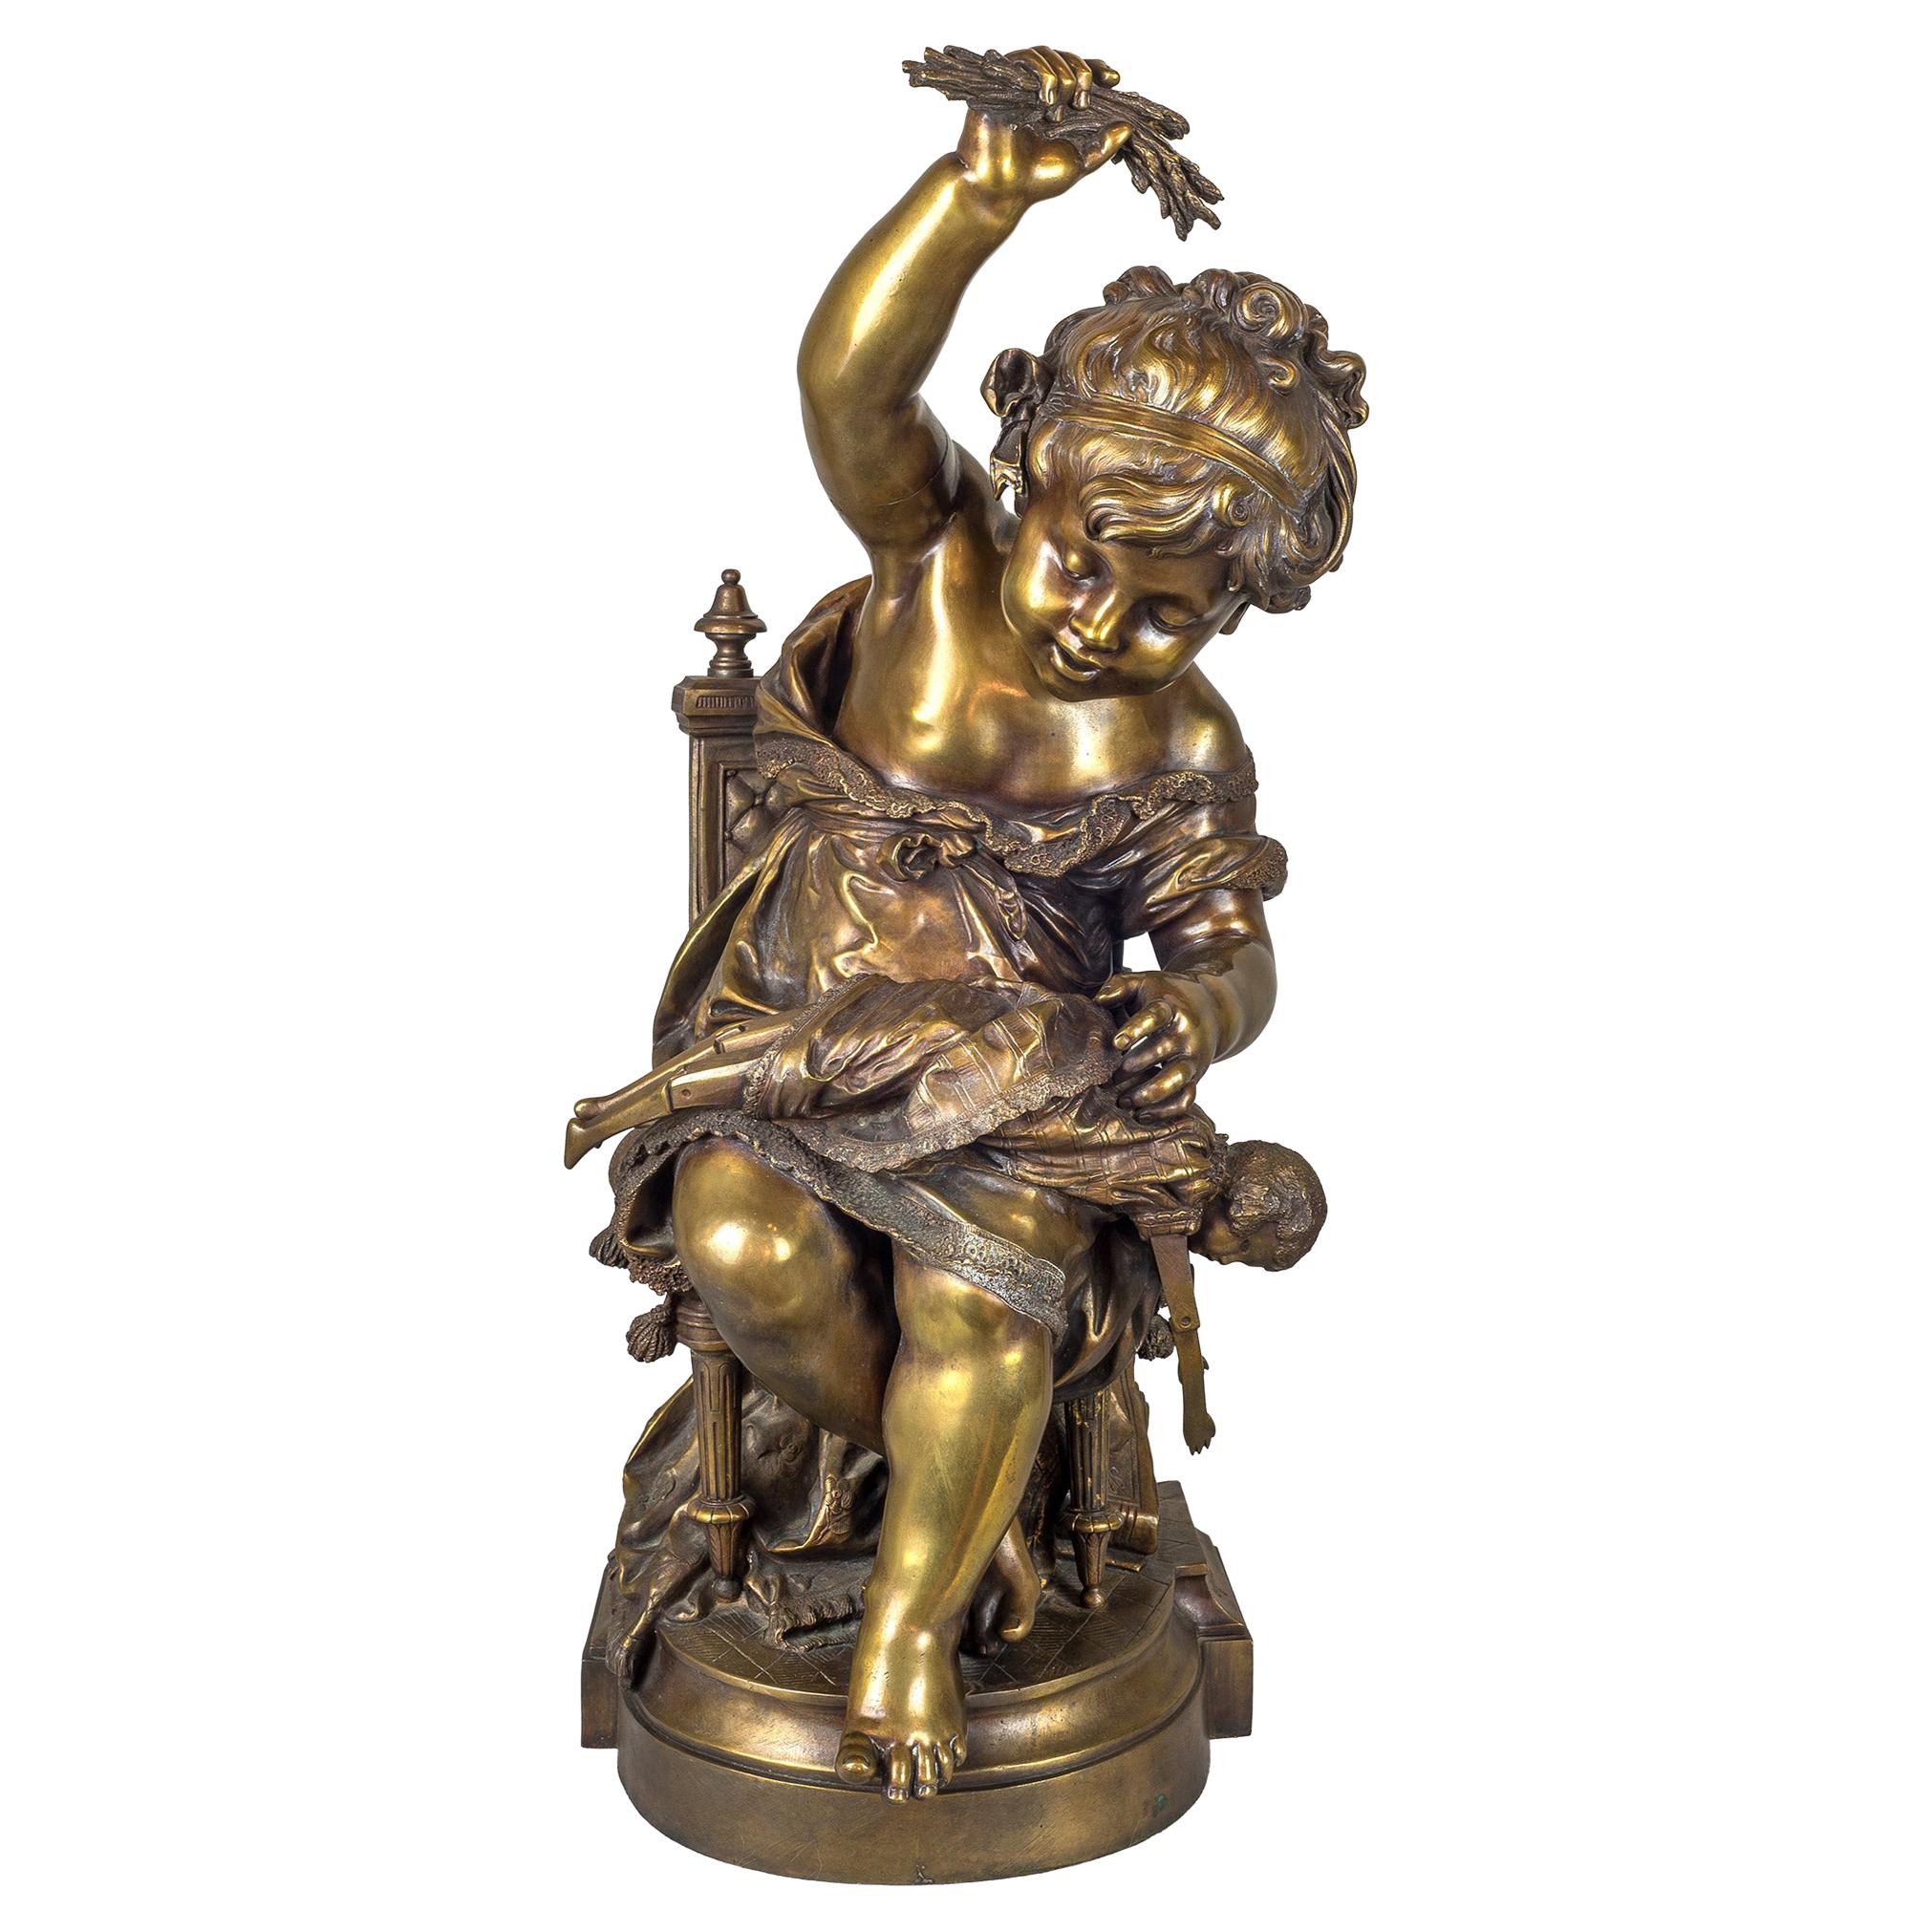 Fine Quality Patinated Bronze Sculpture of a Girl with Doll by Auguste Moreau